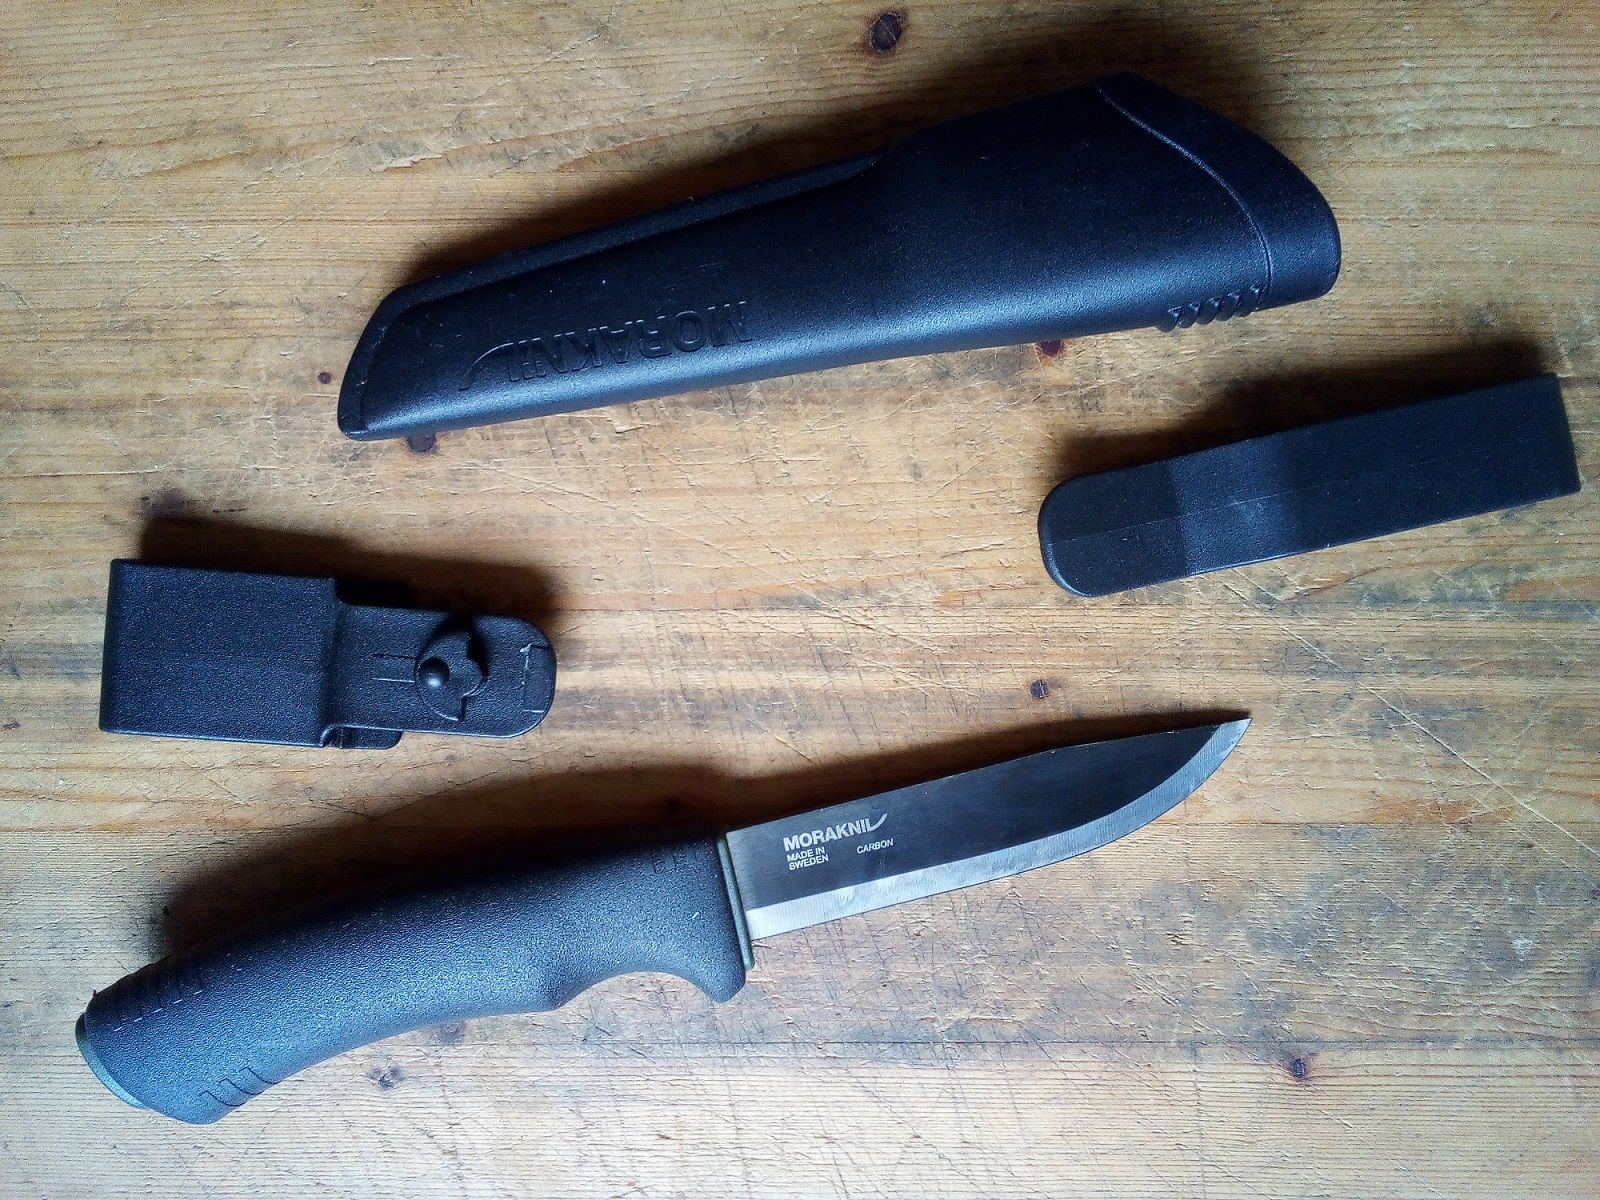 The BUSHCRAFT Black is a 3/4 rat tail tang knife with a total length of 23,2 cm, a blade length of 10,9 cm, with black DLC coating, Scandinavian grind and blade thickness of 3,2mm, weighing 212 grams. The blade is made of carbon steel (C100, 59-60 HRC), while the grip material is rubberised plastic (the sheath material is plastic, as well, and comes with two different belt clips)